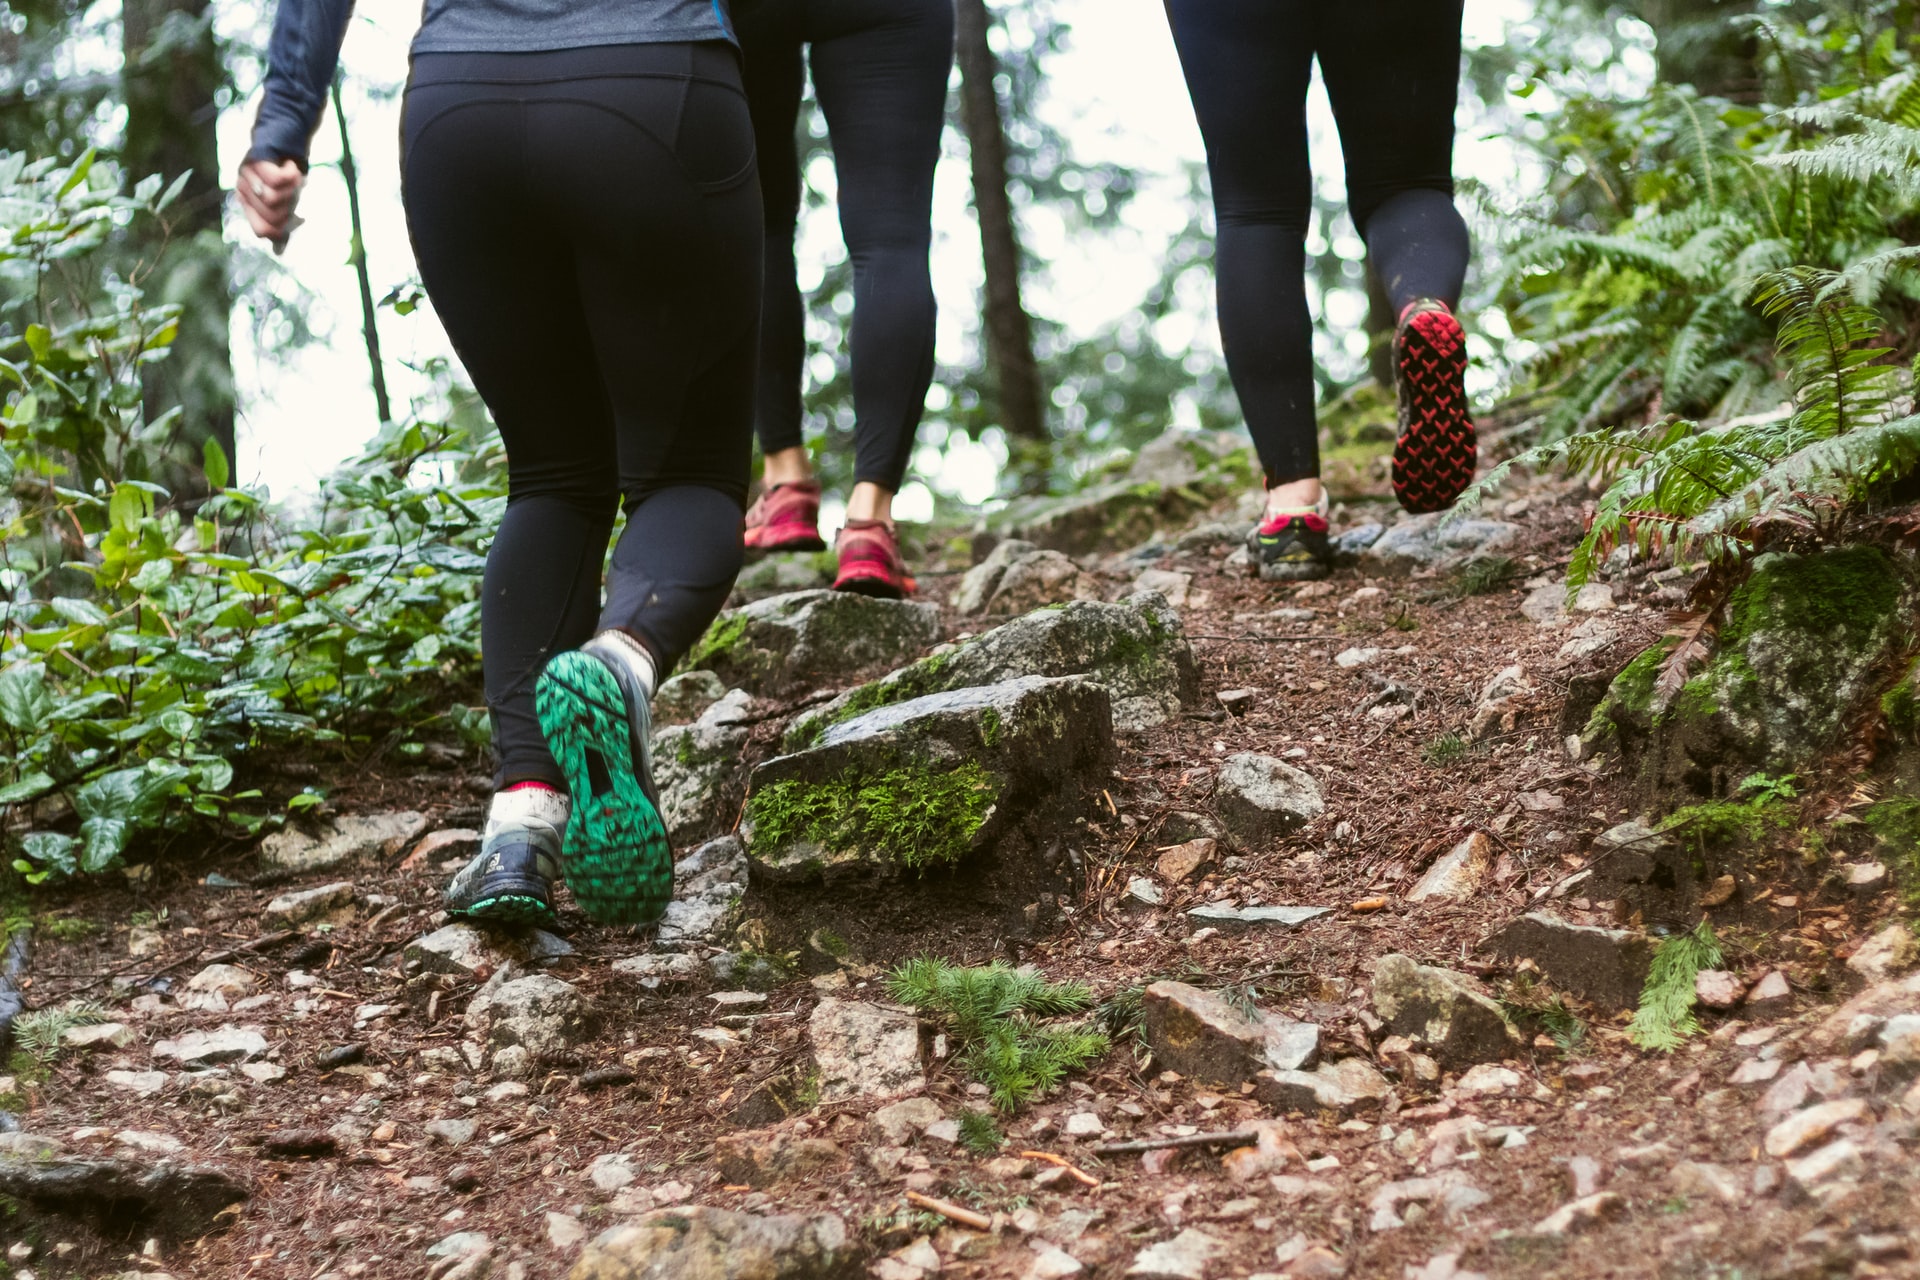 An image of three women hiking to represent the Snowdon challenge